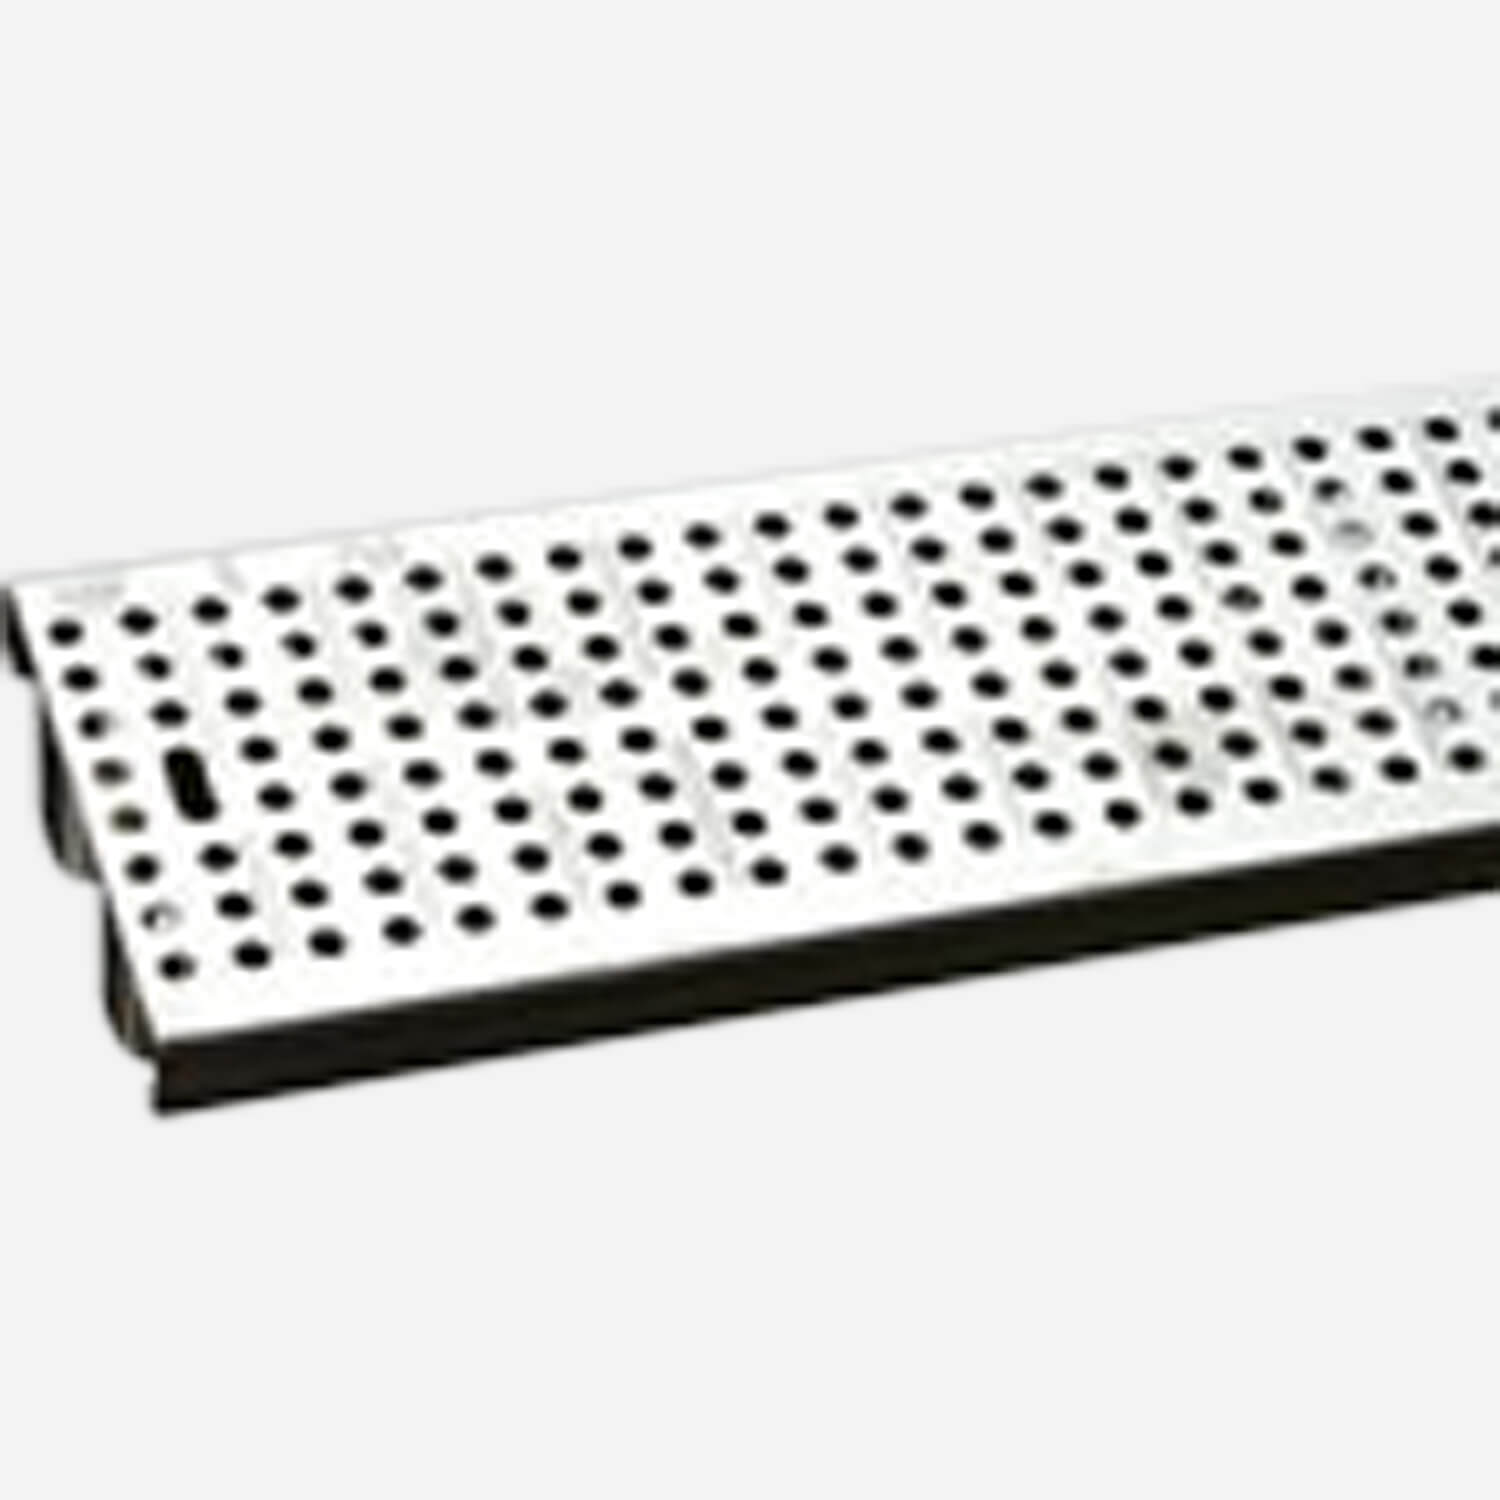 Perforated Stainless Steel Trench Drain Grate (Heavy Duty) - Jay R 